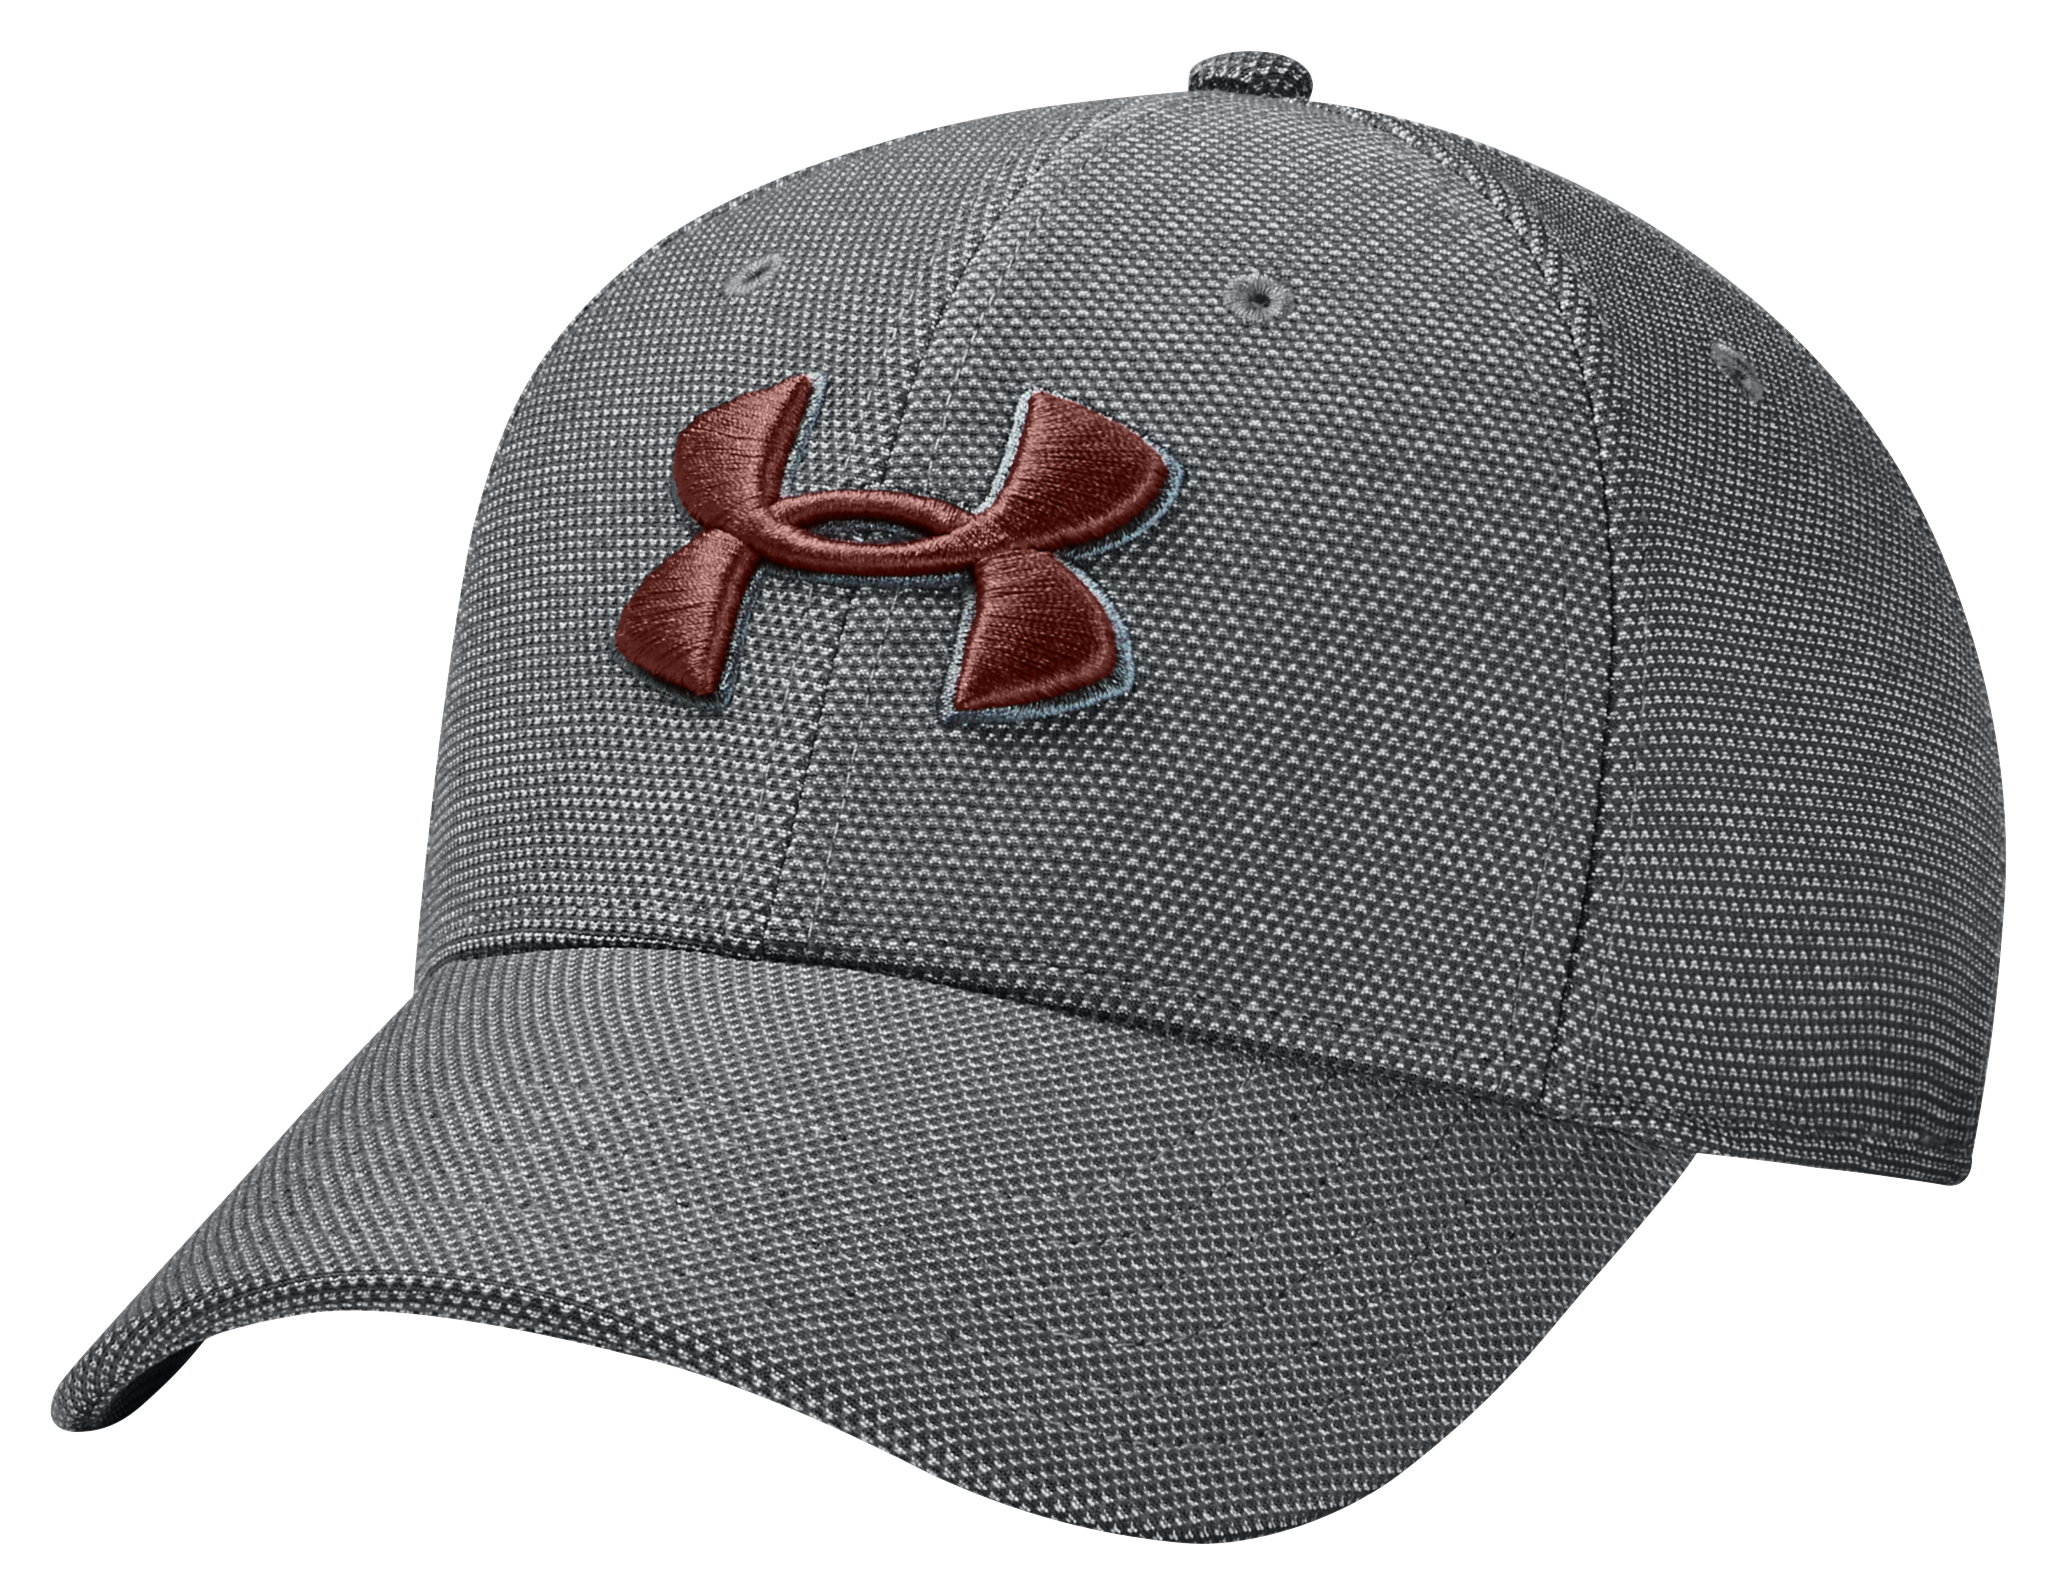 Under Armour Gents Microthread Mesh Cap White 100